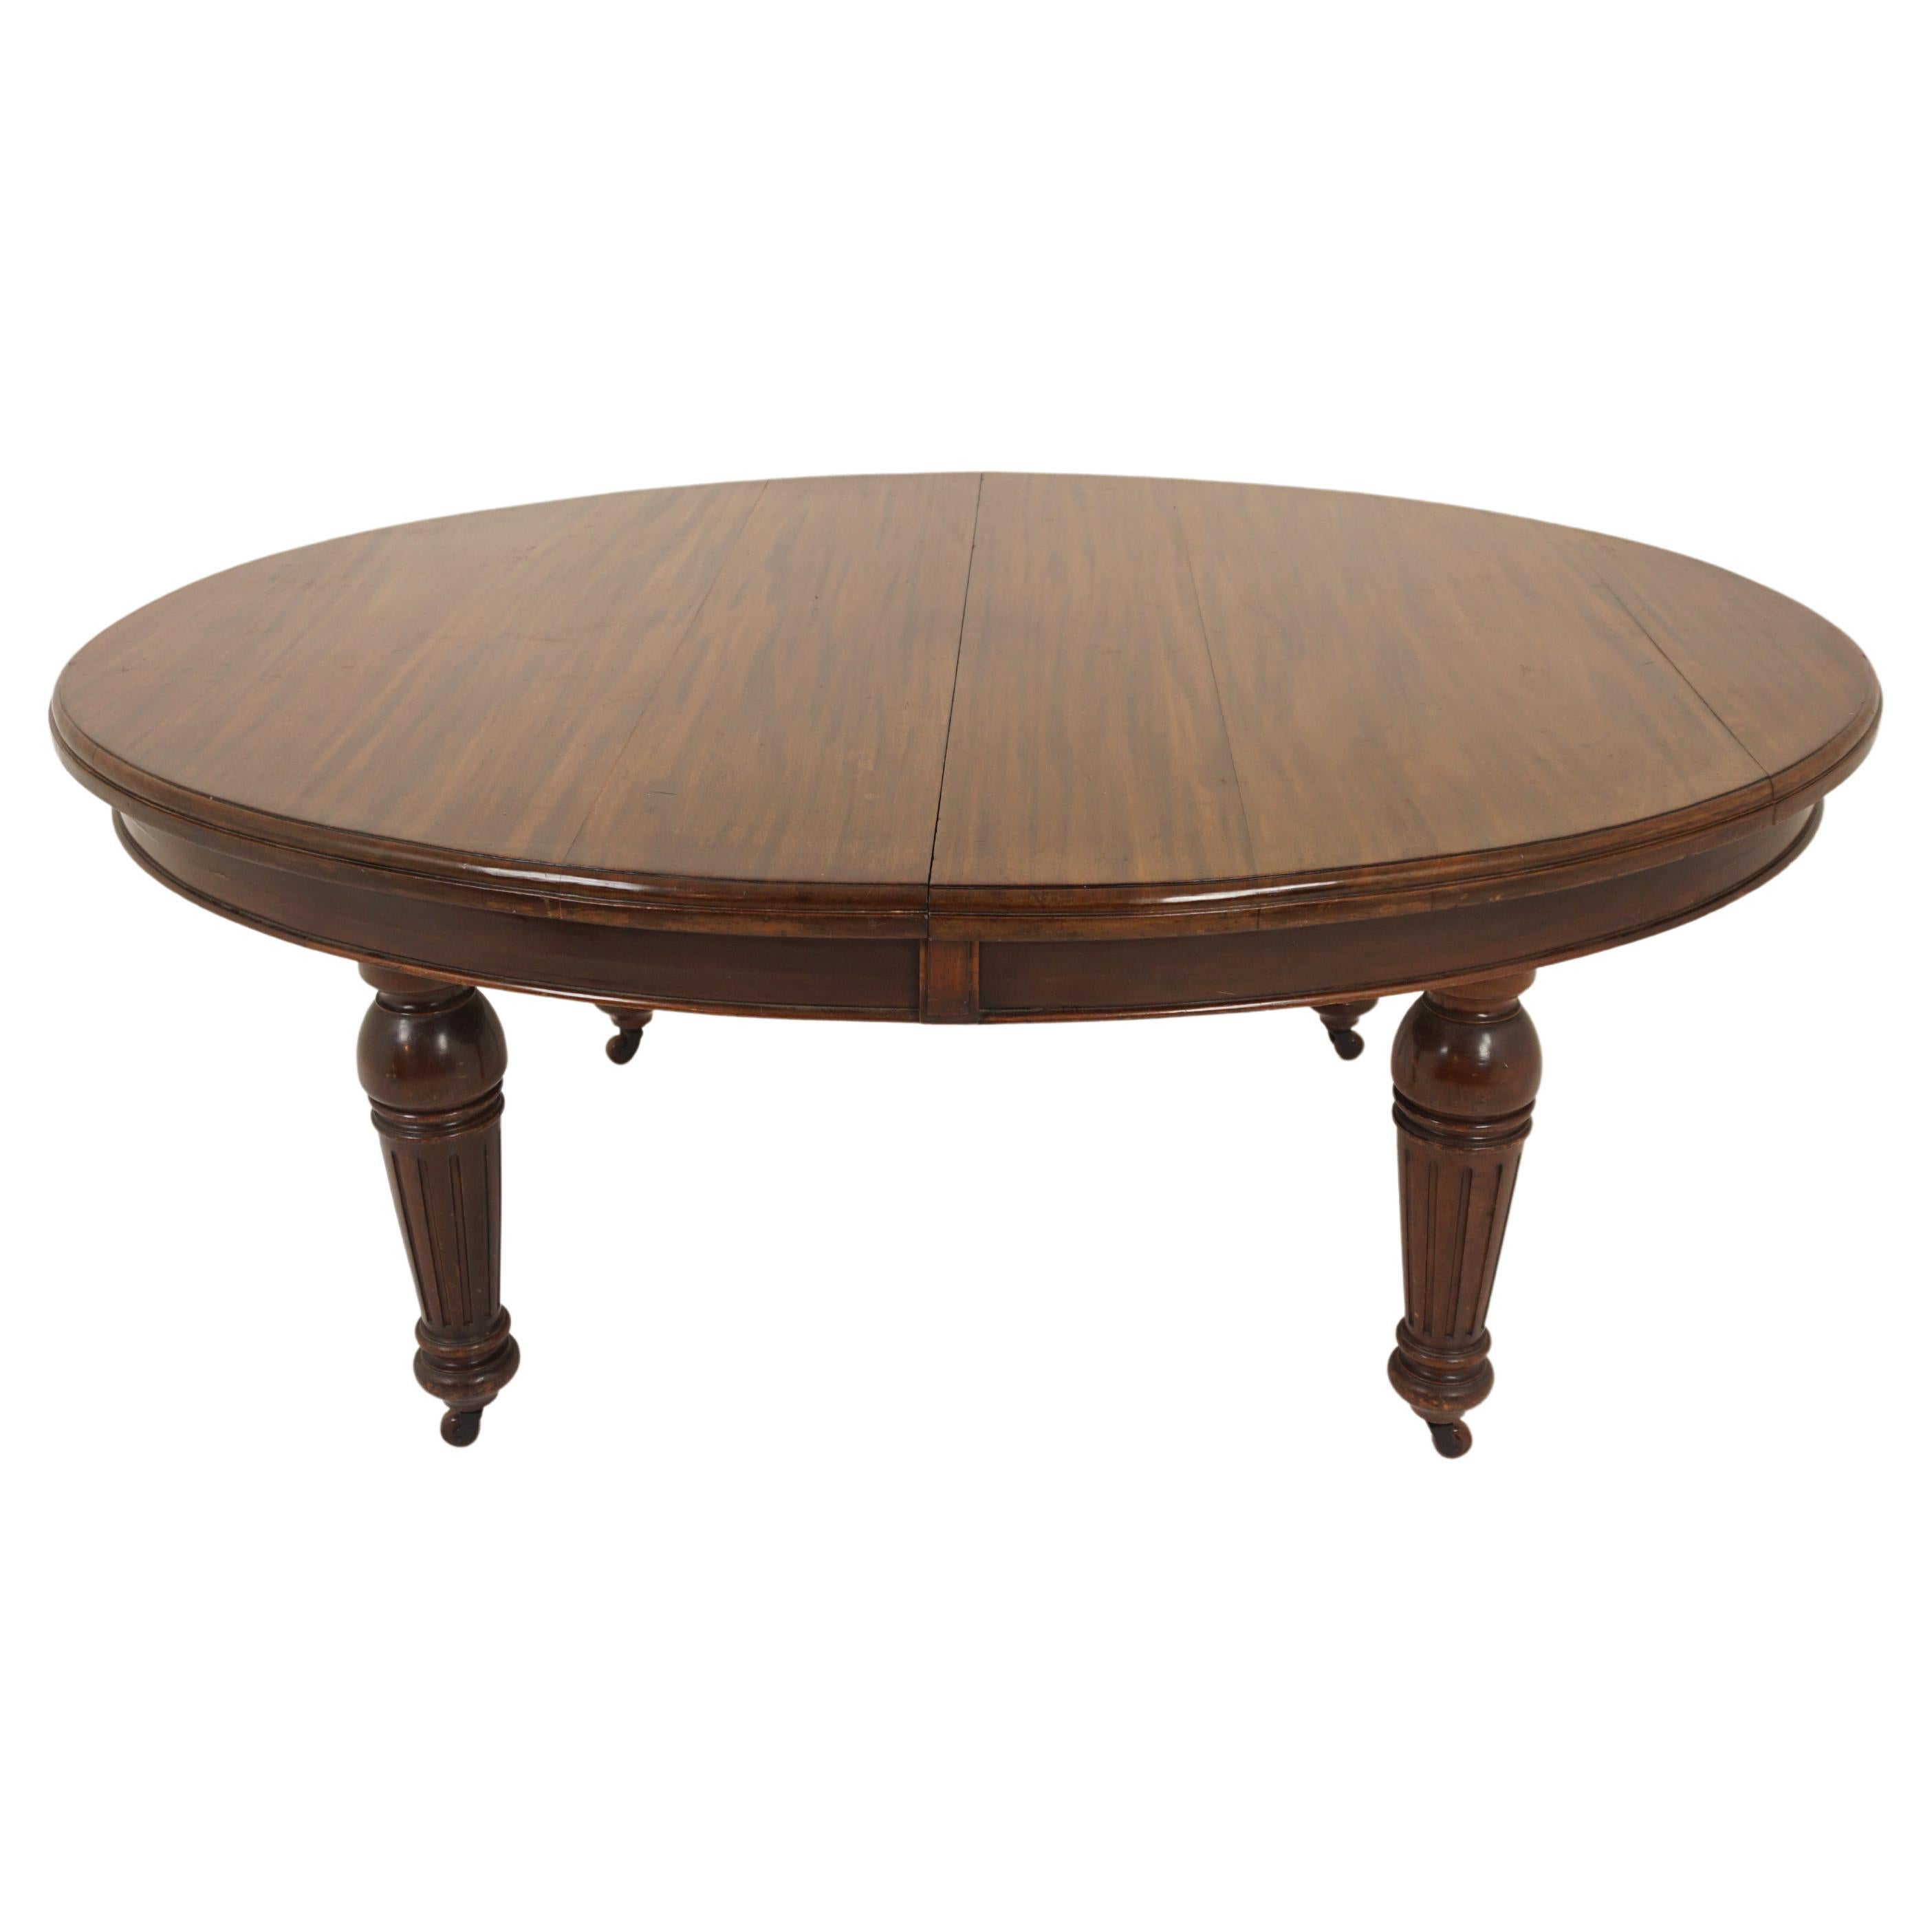 Antique Victorian Oval Mahogany Extending Dining Table, Scotland 1860, H045